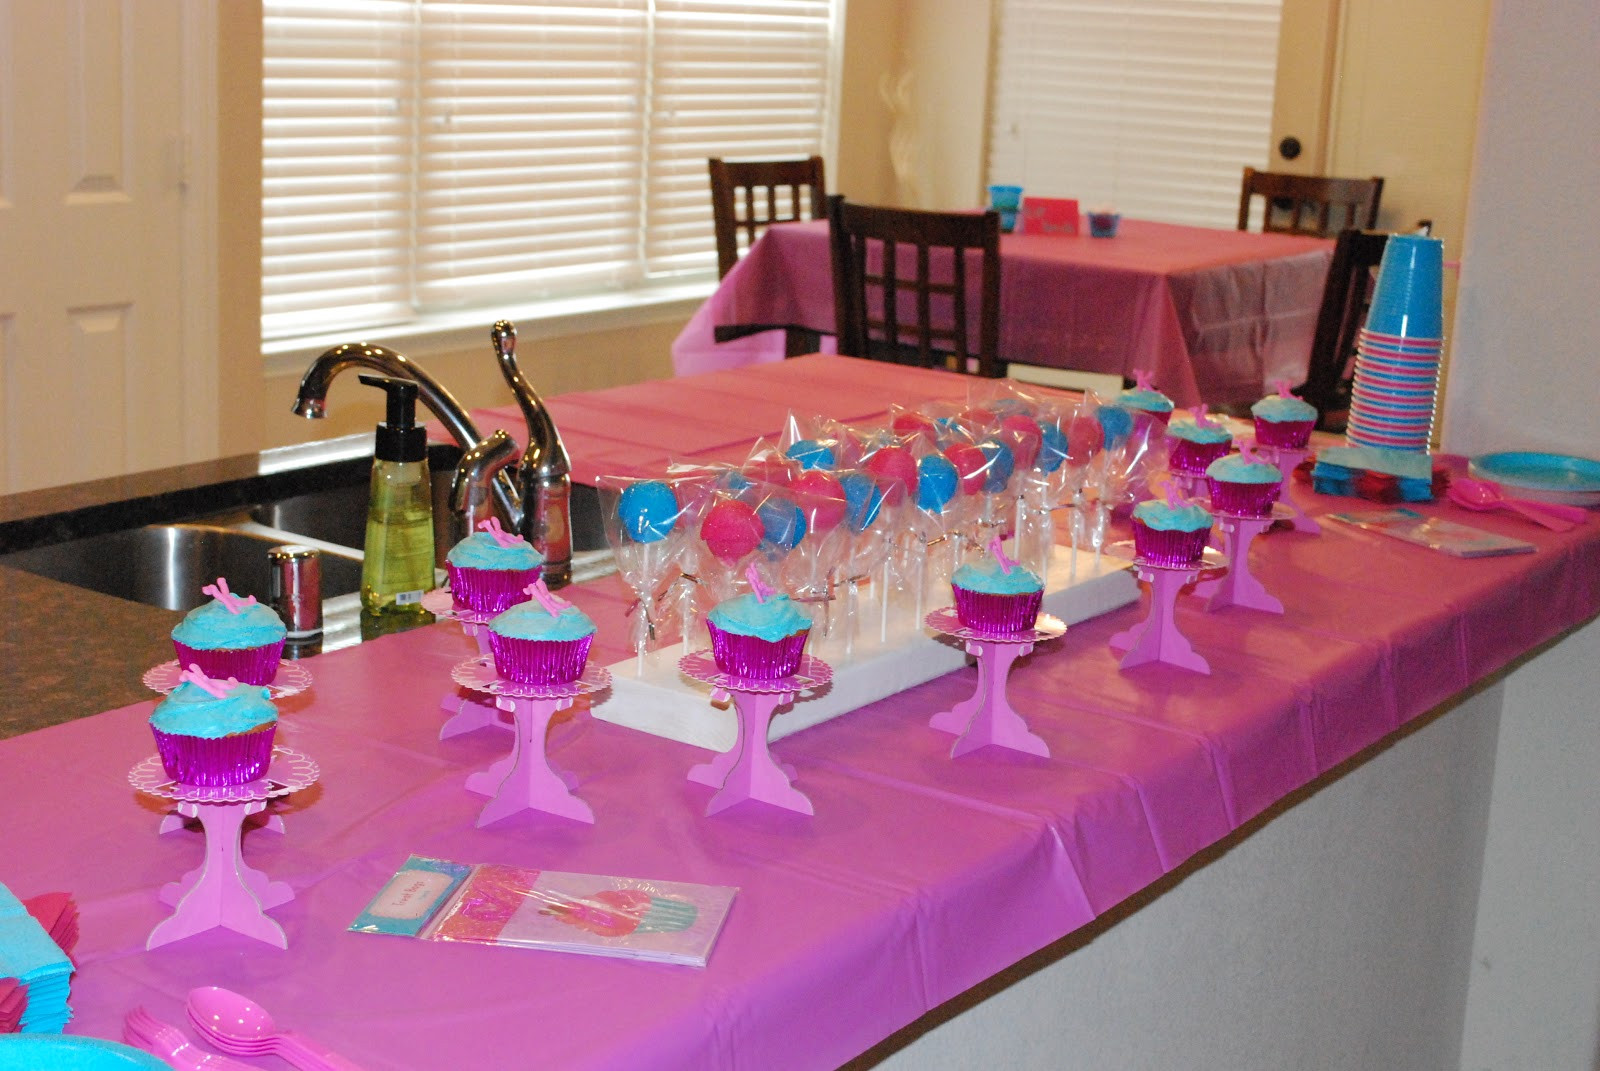 Fun Birthday Party Ideas For 11 Year Olds
 The Simple Life SPArty Birthday Party for my 11 Year Old